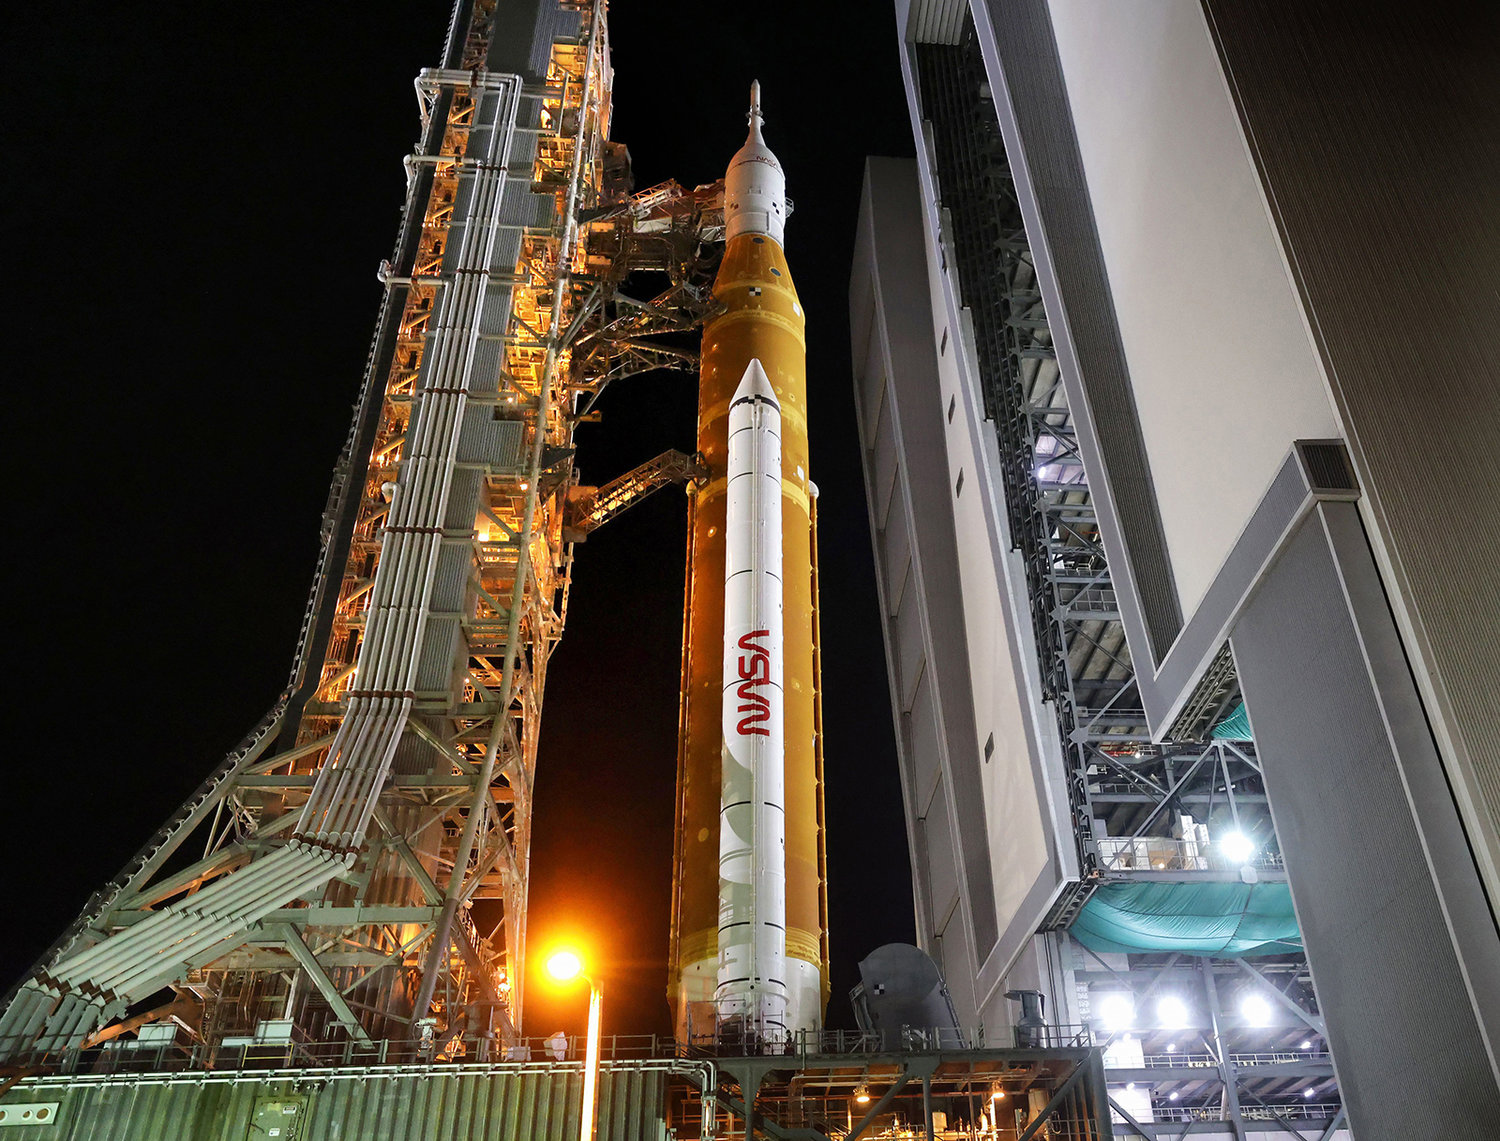 Artemis I leaves the Vehicle Assembly Building as it rolls out to launch pad 39-B at Kennedy Space Center, Florida, Tuesday, August 16, 2022. The rocket is scheduled to launch on an unmanned mission to orbit the moon on Aug. 29. (Joe Burbank/Orlando Sentinel/TNS)